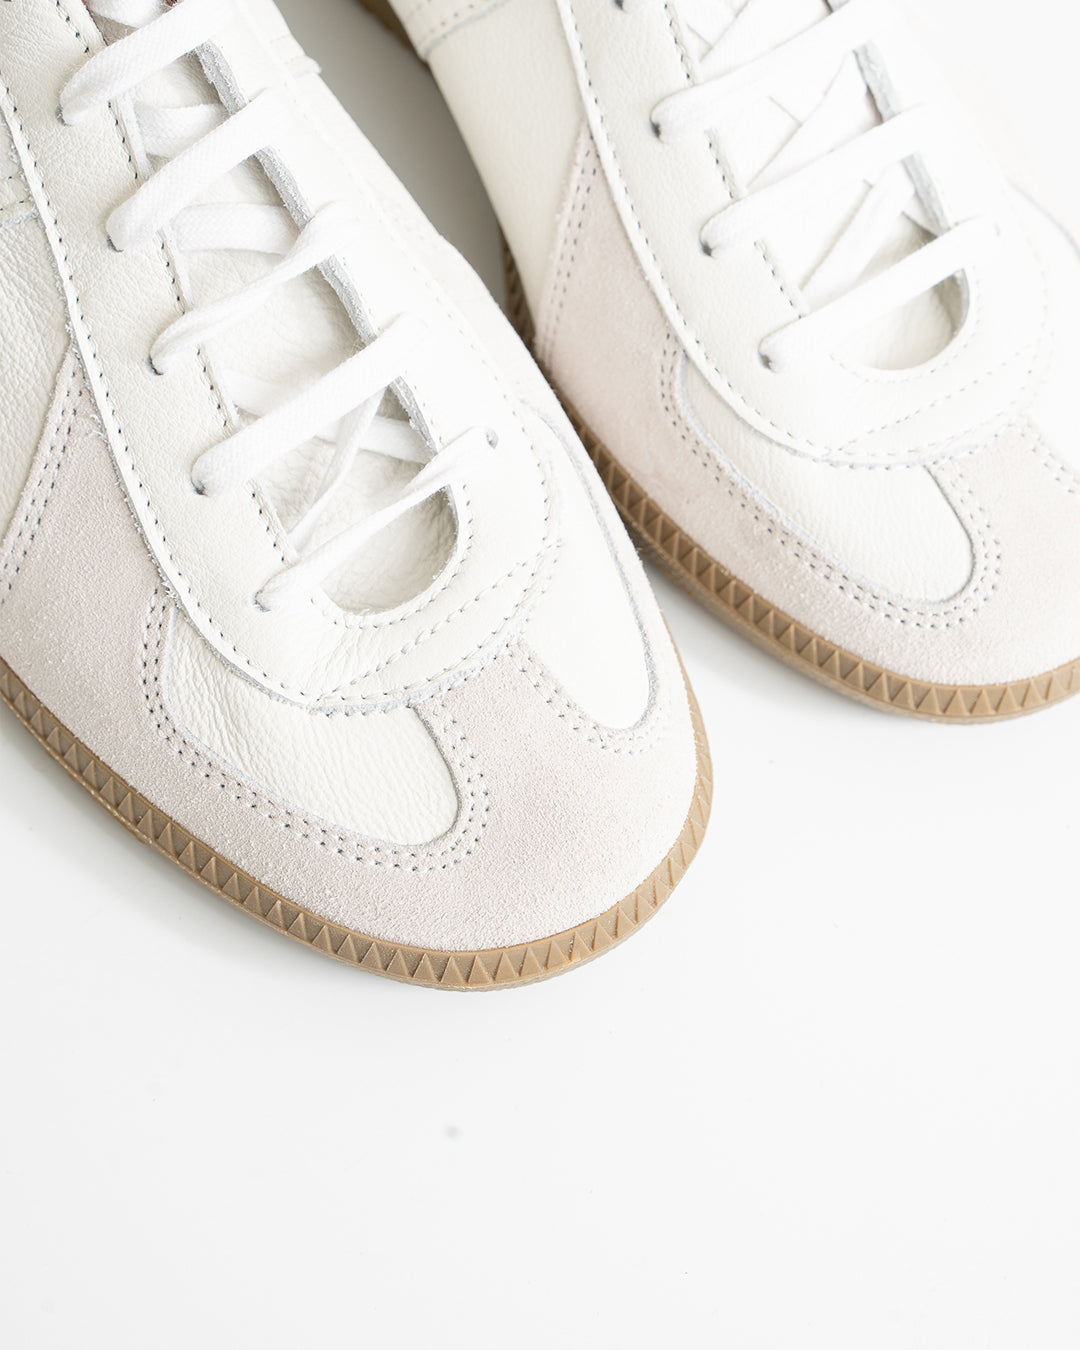 Reproduction of Found Sneaker White